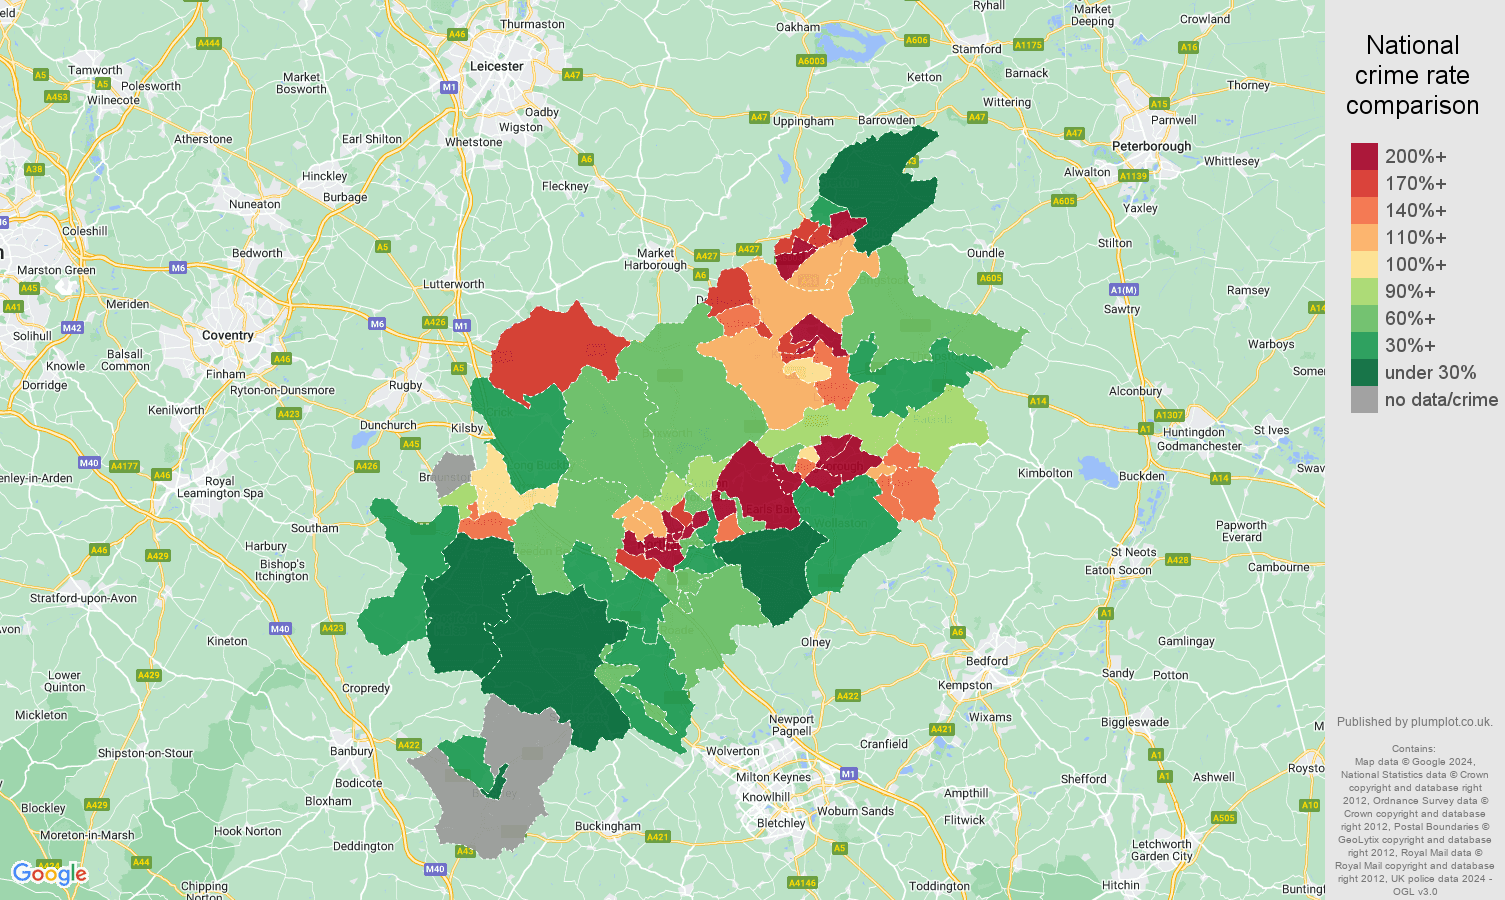 Northampton possession of weapons crime rate comparison map